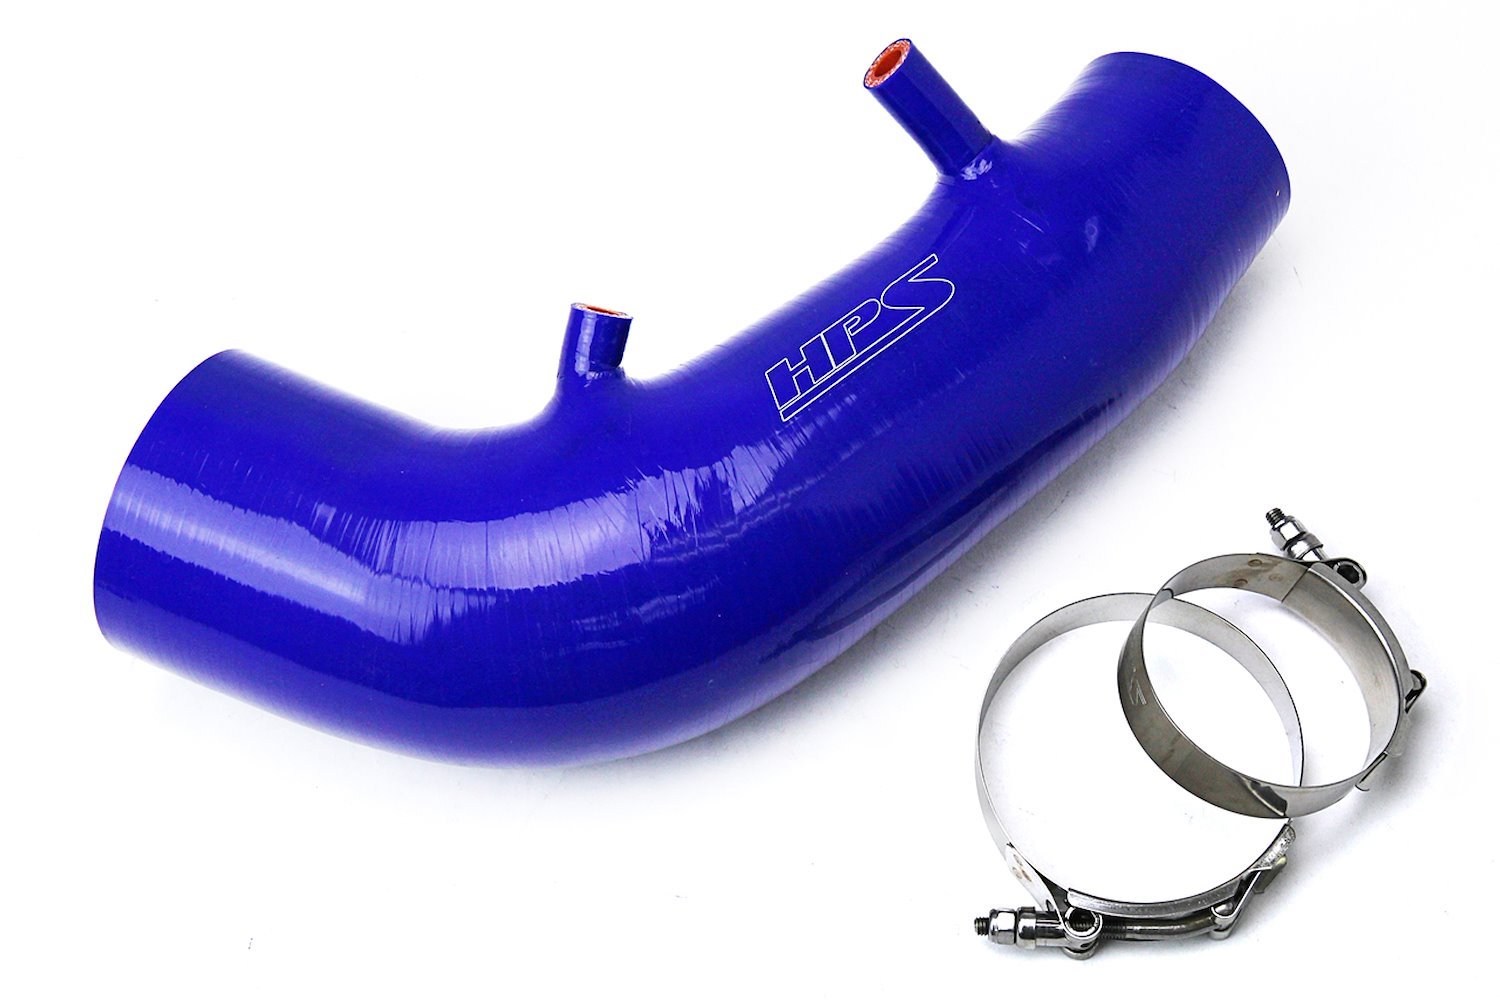 57-3004-BLUE Silicone Air Intake, Replace Stock Restrictive Air Intake, Improve Throttle Response, No Heat Soak